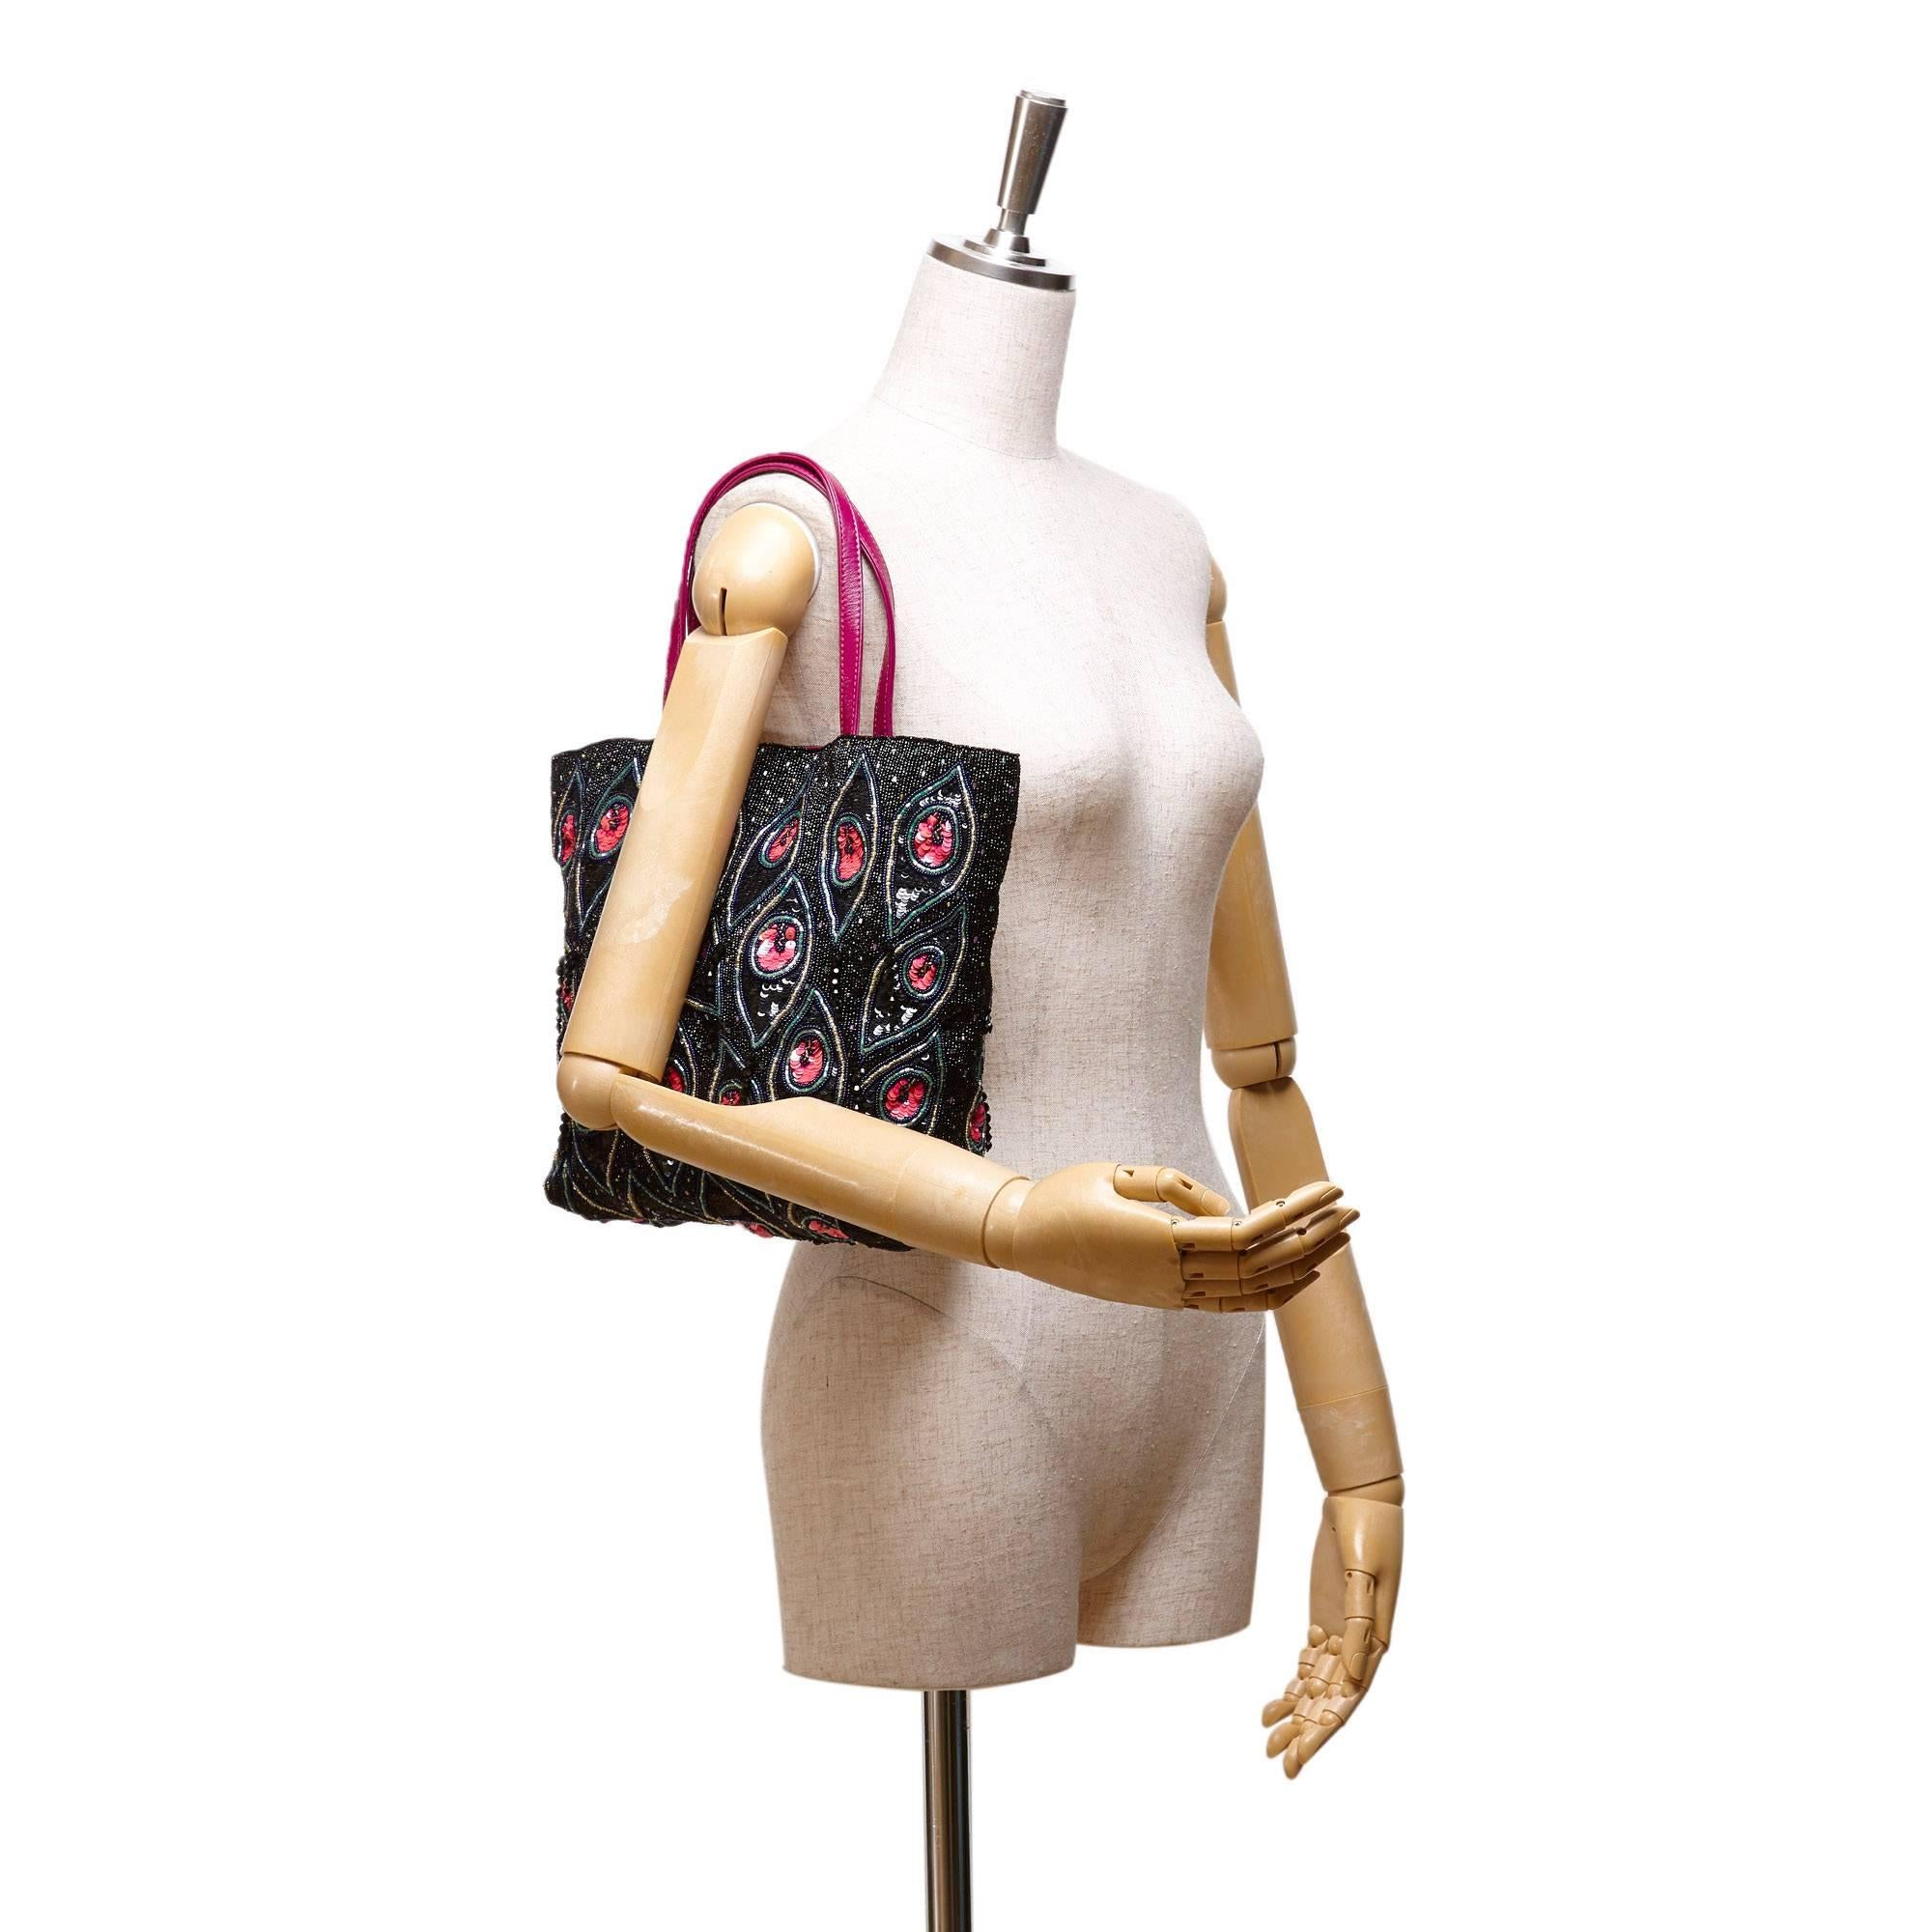 - This Valentino tote bag features a fabric body with multi colour sequin embellishments, a pink leather strap, an open top, and interior zip pocket. This Valentino eyelet pattern tote bag is sexy to carry around town. 

- Made in Italy. 

- Size: